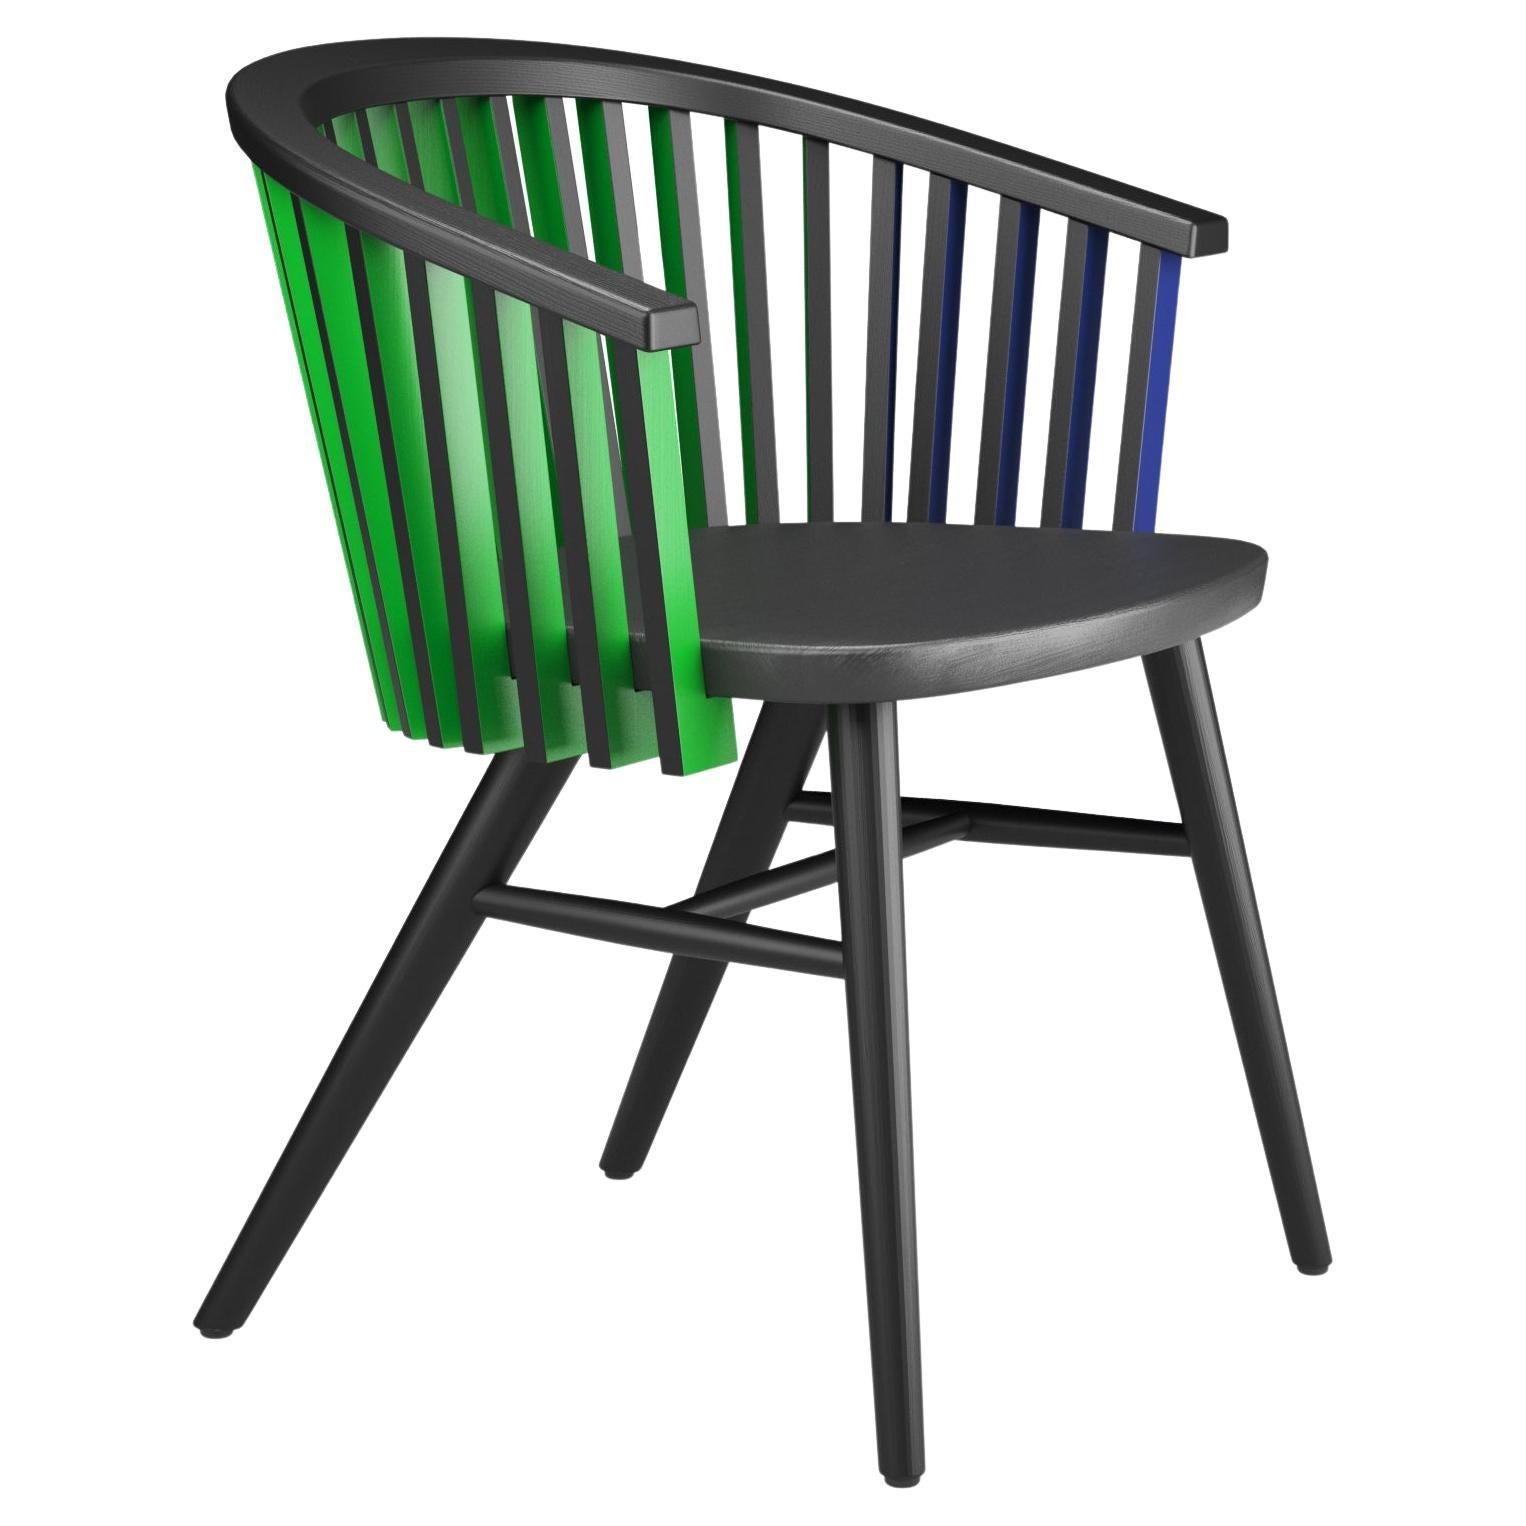 Hayche, Tornasol Rounded chair, Bla, Green & Blue, Solid Wood, UK, Made To Order